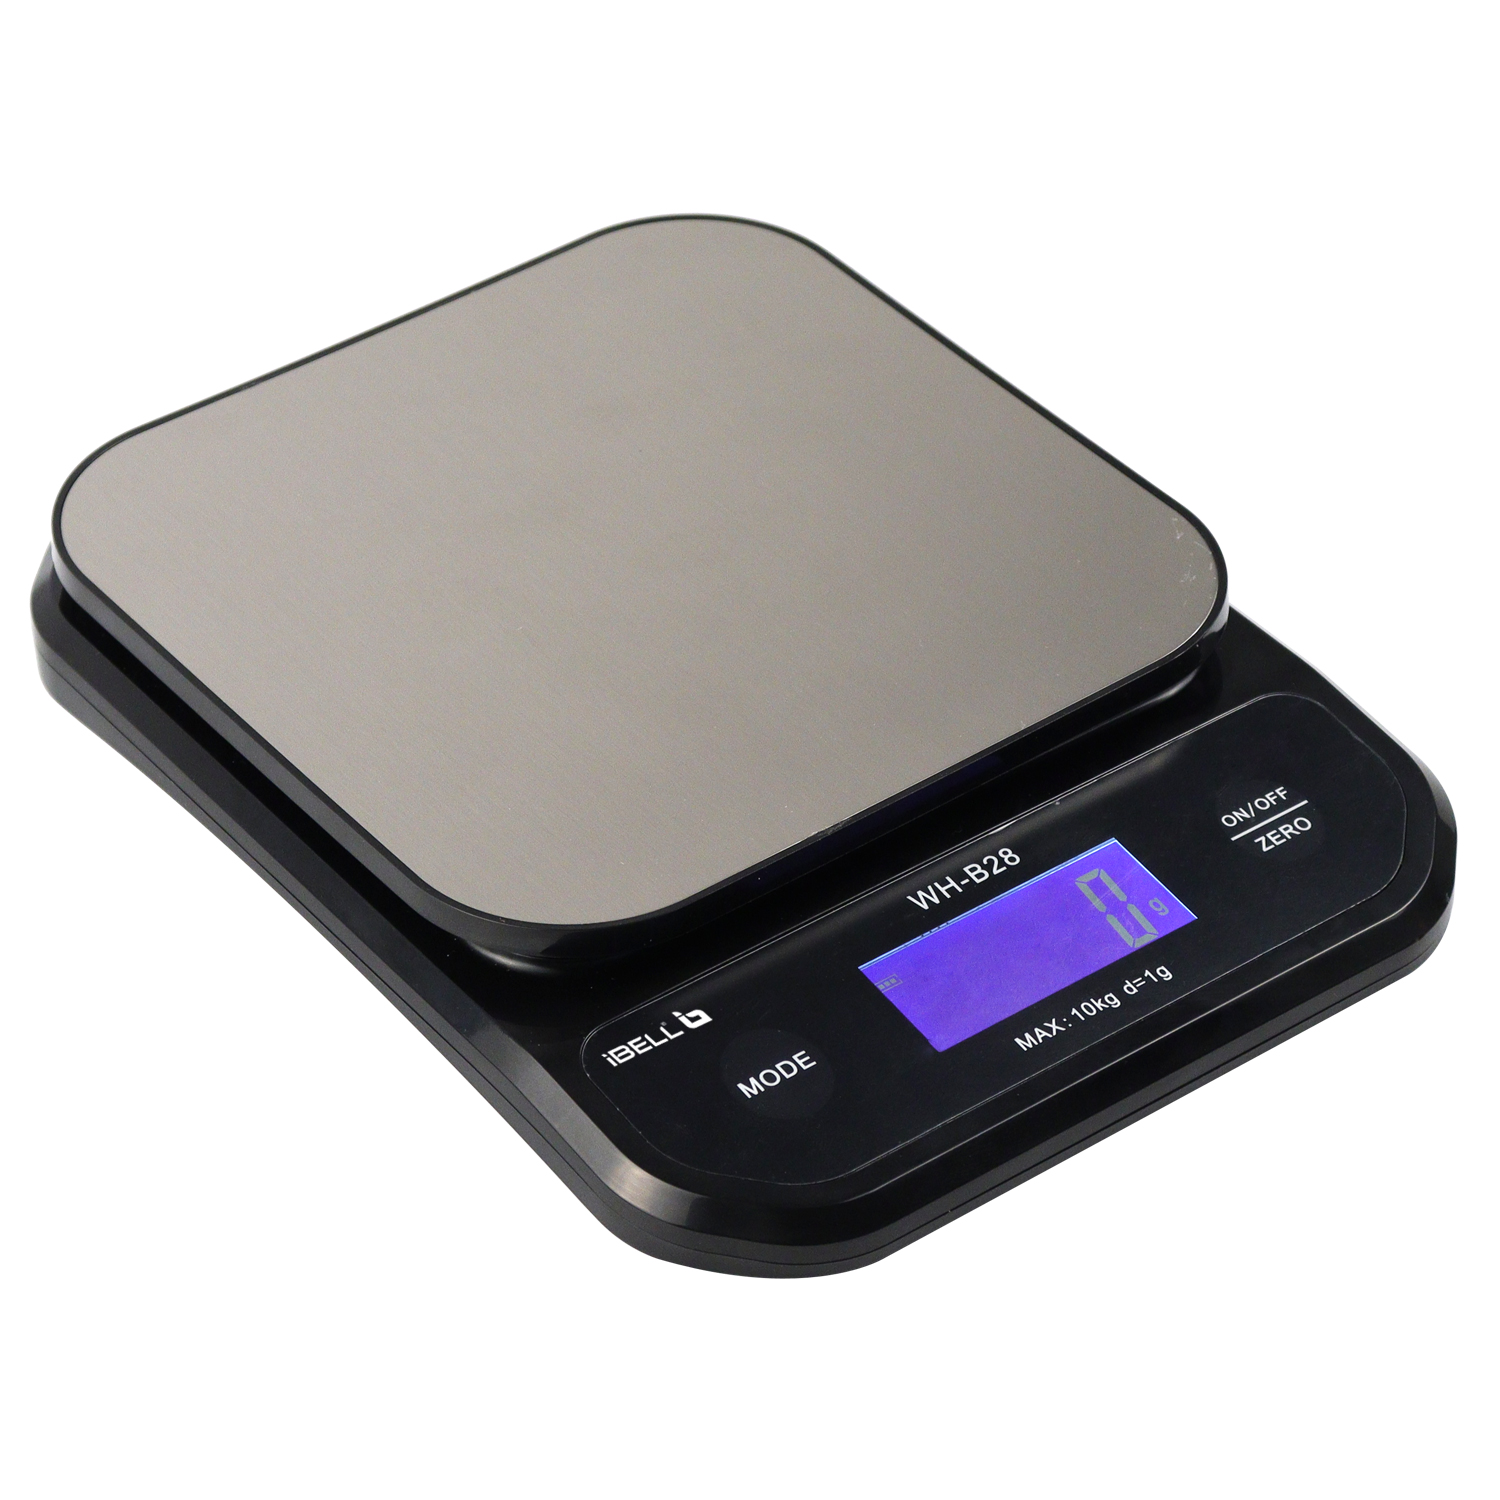 Ibell whb28 stainless steel premium finish digital kitchen weighing scale  tare function portable electronic food weight machine 10kg backlit lcd  display inbuilt battery usb charging function